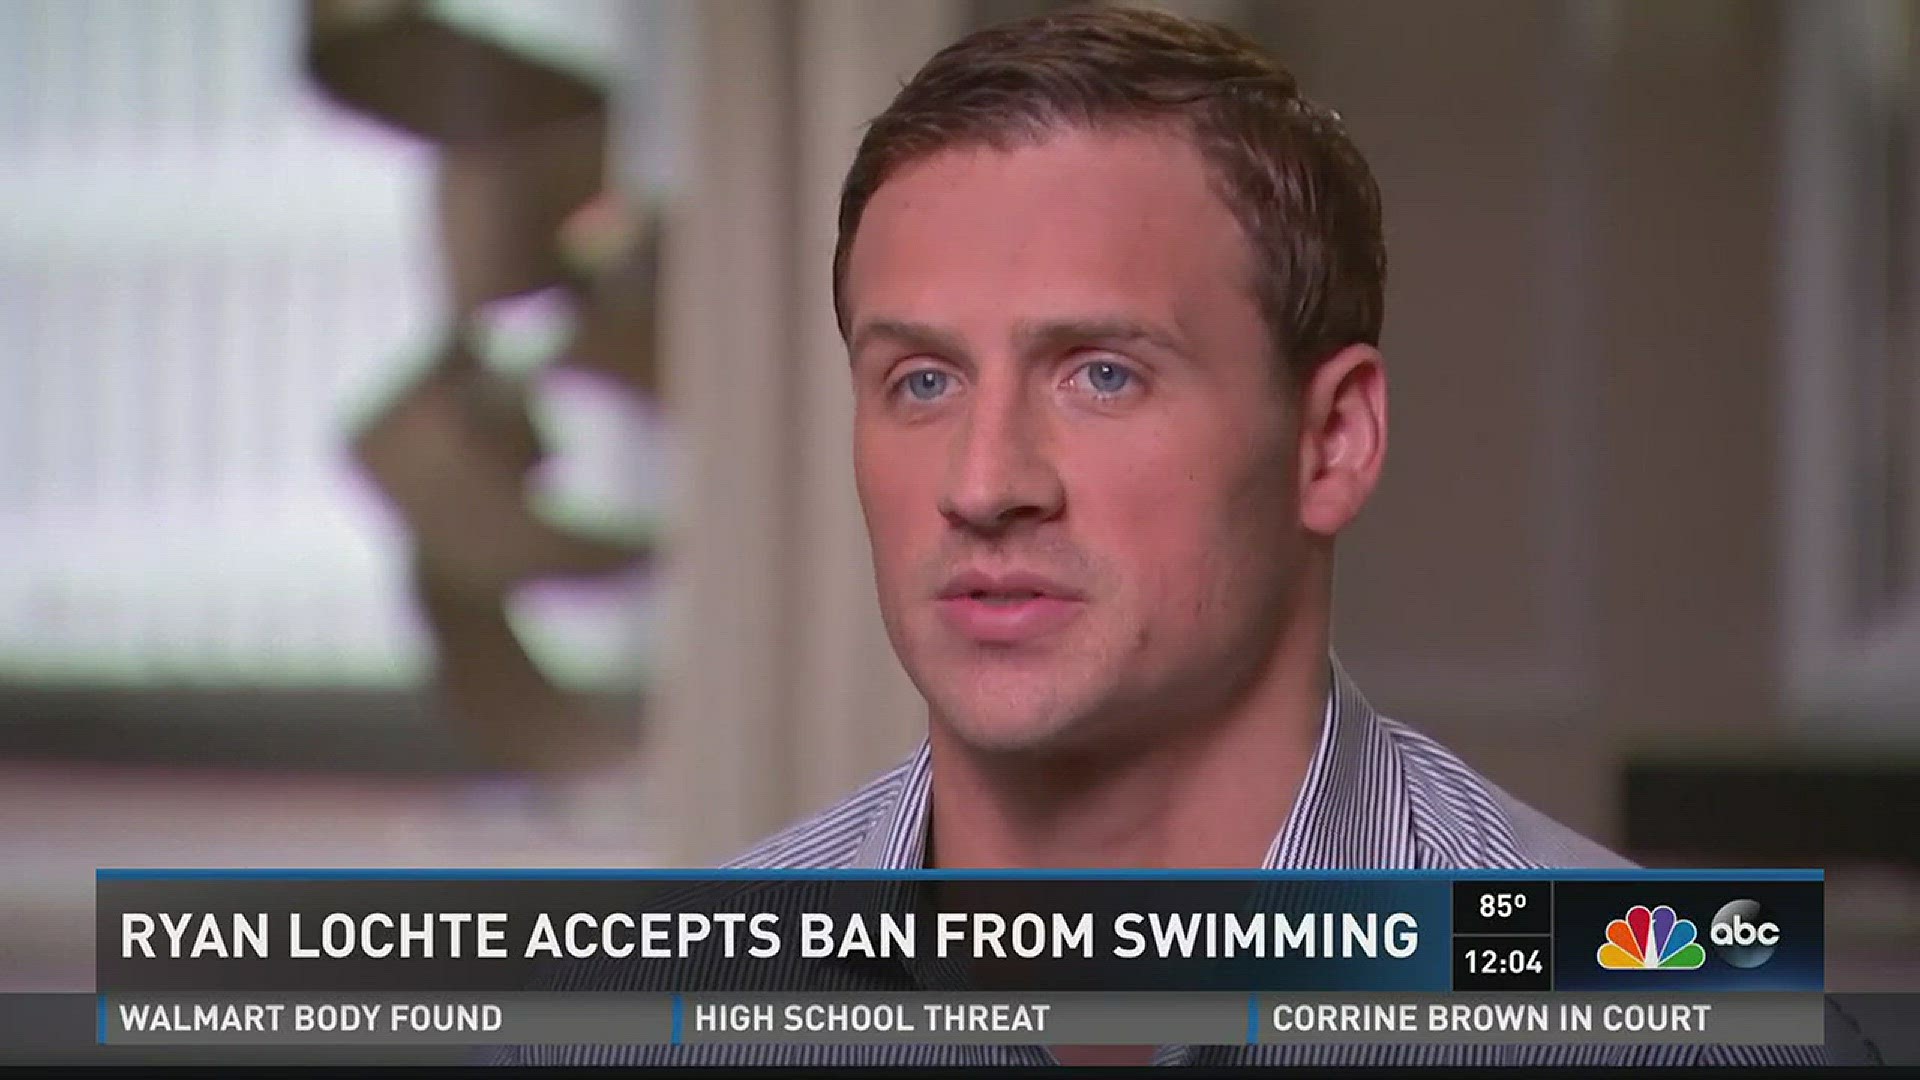 Ryan Lochte accepts ban from swimming